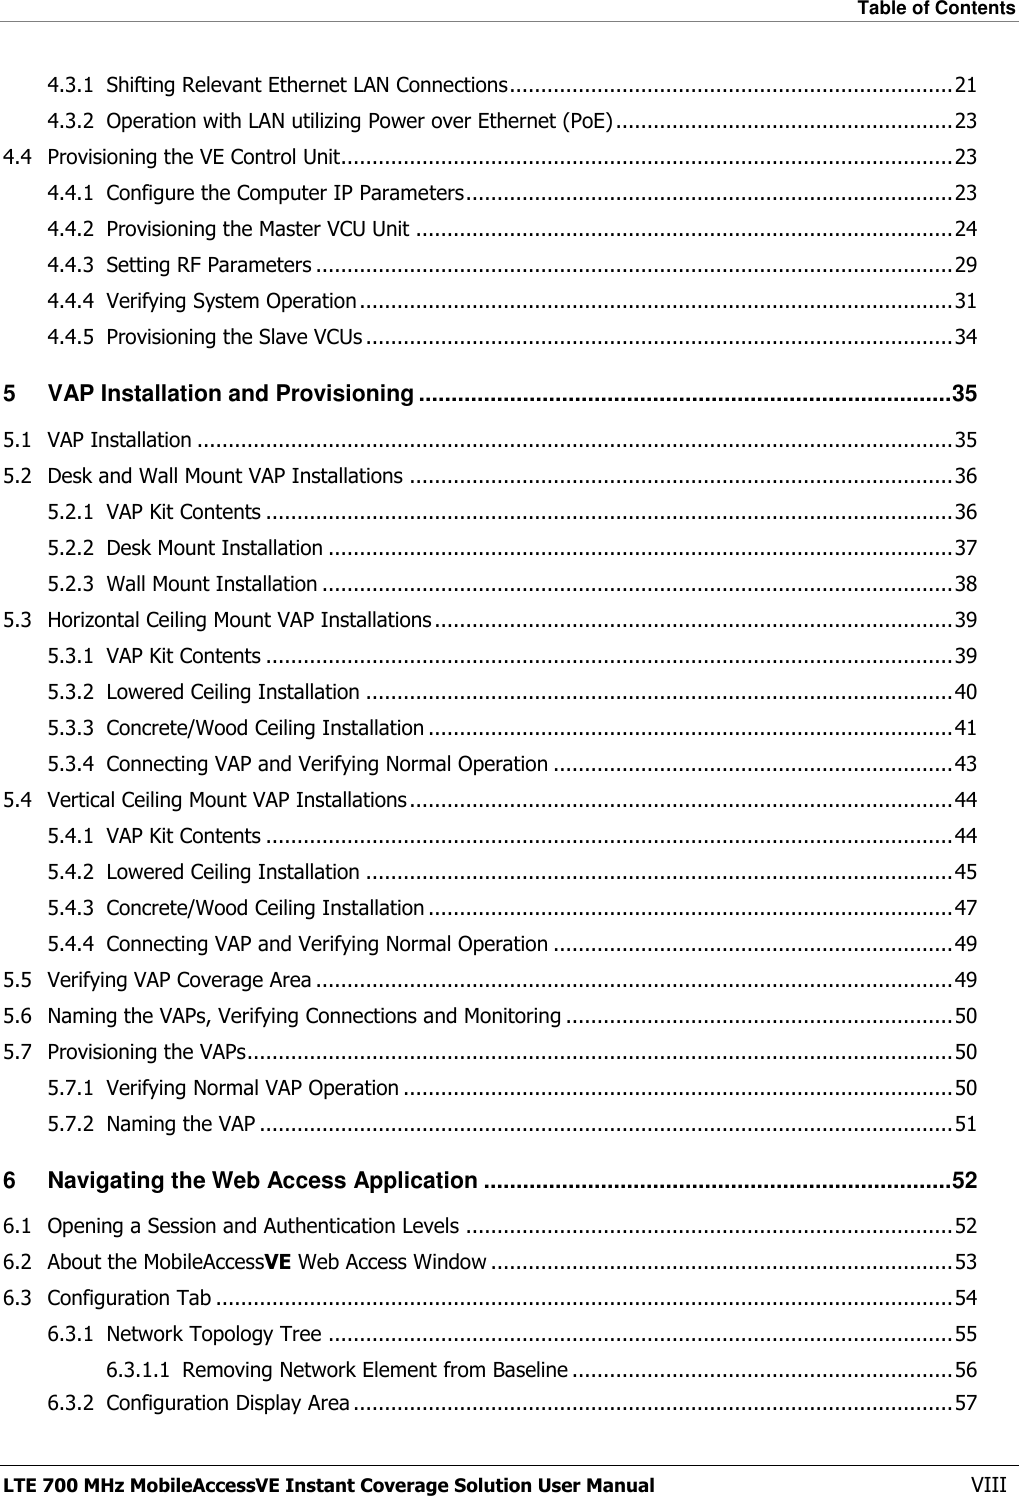 Table of Contents  LTE 700 MHz MobileAccessVE Instant Coverage Solution User Manual  VIII 4.3.1 Shifting Relevant Ethernet LAN Connections ....................................................................... 21 4.3.2 Operation with LAN utilizing Power over Ethernet (PoE) ...................................................... 23 4.4 Provisioning the VE Control Unit.................................................................................................. 23 4.4.1 Configure the Computer IP Parameters .............................................................................. 23 4.4.2 Provisioning the Master VCU Unit ...................................................................................... 24 4.4.3 Setting RF Parameters ...................................................................................................... 29 4.4.4 Verifying System Operation ............................................................................................... 31 4.4.5 Provisioning the Slave VCUs .............................................................................................. 34 5 VAP Installation and Provisioning .................................................................................. 35 5.1 VAP Installation ......................................................................................................................... 35 5.2 Desk and Wall Mount VAP Installations ....................................................................................... 36 5.2.1 VAP Kit Contents .............................................................................................................. 36 5.2.2 Desk Mount Installation .................................................................................................... 37 5.2.3 Wall Mount Installation ..................................................................................................... 38 5.3 Horizontal Ceiling Mount VAP Installations ................................................................................... 39 5.3.1 VAP Kit Contents .............................................................................................................. 39 5.3.2 Lowered Ceiling Installation .............................................................................................. 40 5.3.3 Concrete/Wood Ceiling Installation .................................................................................... 41 5.3.4 Connecting VAP and Verifying Normal Operation ................................................................ 43 5.4 Vertical Ceiling Mount VAP Installations ....................................................................................... 44 5.4.1 VAP Kit Contents .............................................................................................................. 44 5.4.2 Lowered Ceiling Installation .............................................................................................. 45 5.4.3 Concrete/Wood Ceiling Installation .................................................................................... 47 5.4.4 Connecting VAP and Verifying Normal Operation ................................................................ 49 5.5 Verifying VAP Coverage Area ...................................................................................................... 49 5.6 Naming the VAPs, Verifying Connections and Monitoring .............................................................. 50 5.7 Provisioning the VAPs ................................................................................................................. 50 5.7.1 Verifying Normal VAP Operation ........................................................................................ 50 5.7.2 Naming the VAP ............................................................................................................... 51 6 Navigating the Web Access Application ........................................................................ 52 6.1 Opening a Session and Authentication Levels .............................................................................. 52 6.2 About the MobileAccessVE Web Access Window .......................................................................... 53 6.3 Configuration Tab ...................................................................................................................... 54 6.3.1 Network Topology Tree .................................................................................................... 55 6.3.1.1 Removing Network Element from Baseline ............................................................. 56 6.3.2 Configuration Display Area ................................................................................................ 57 